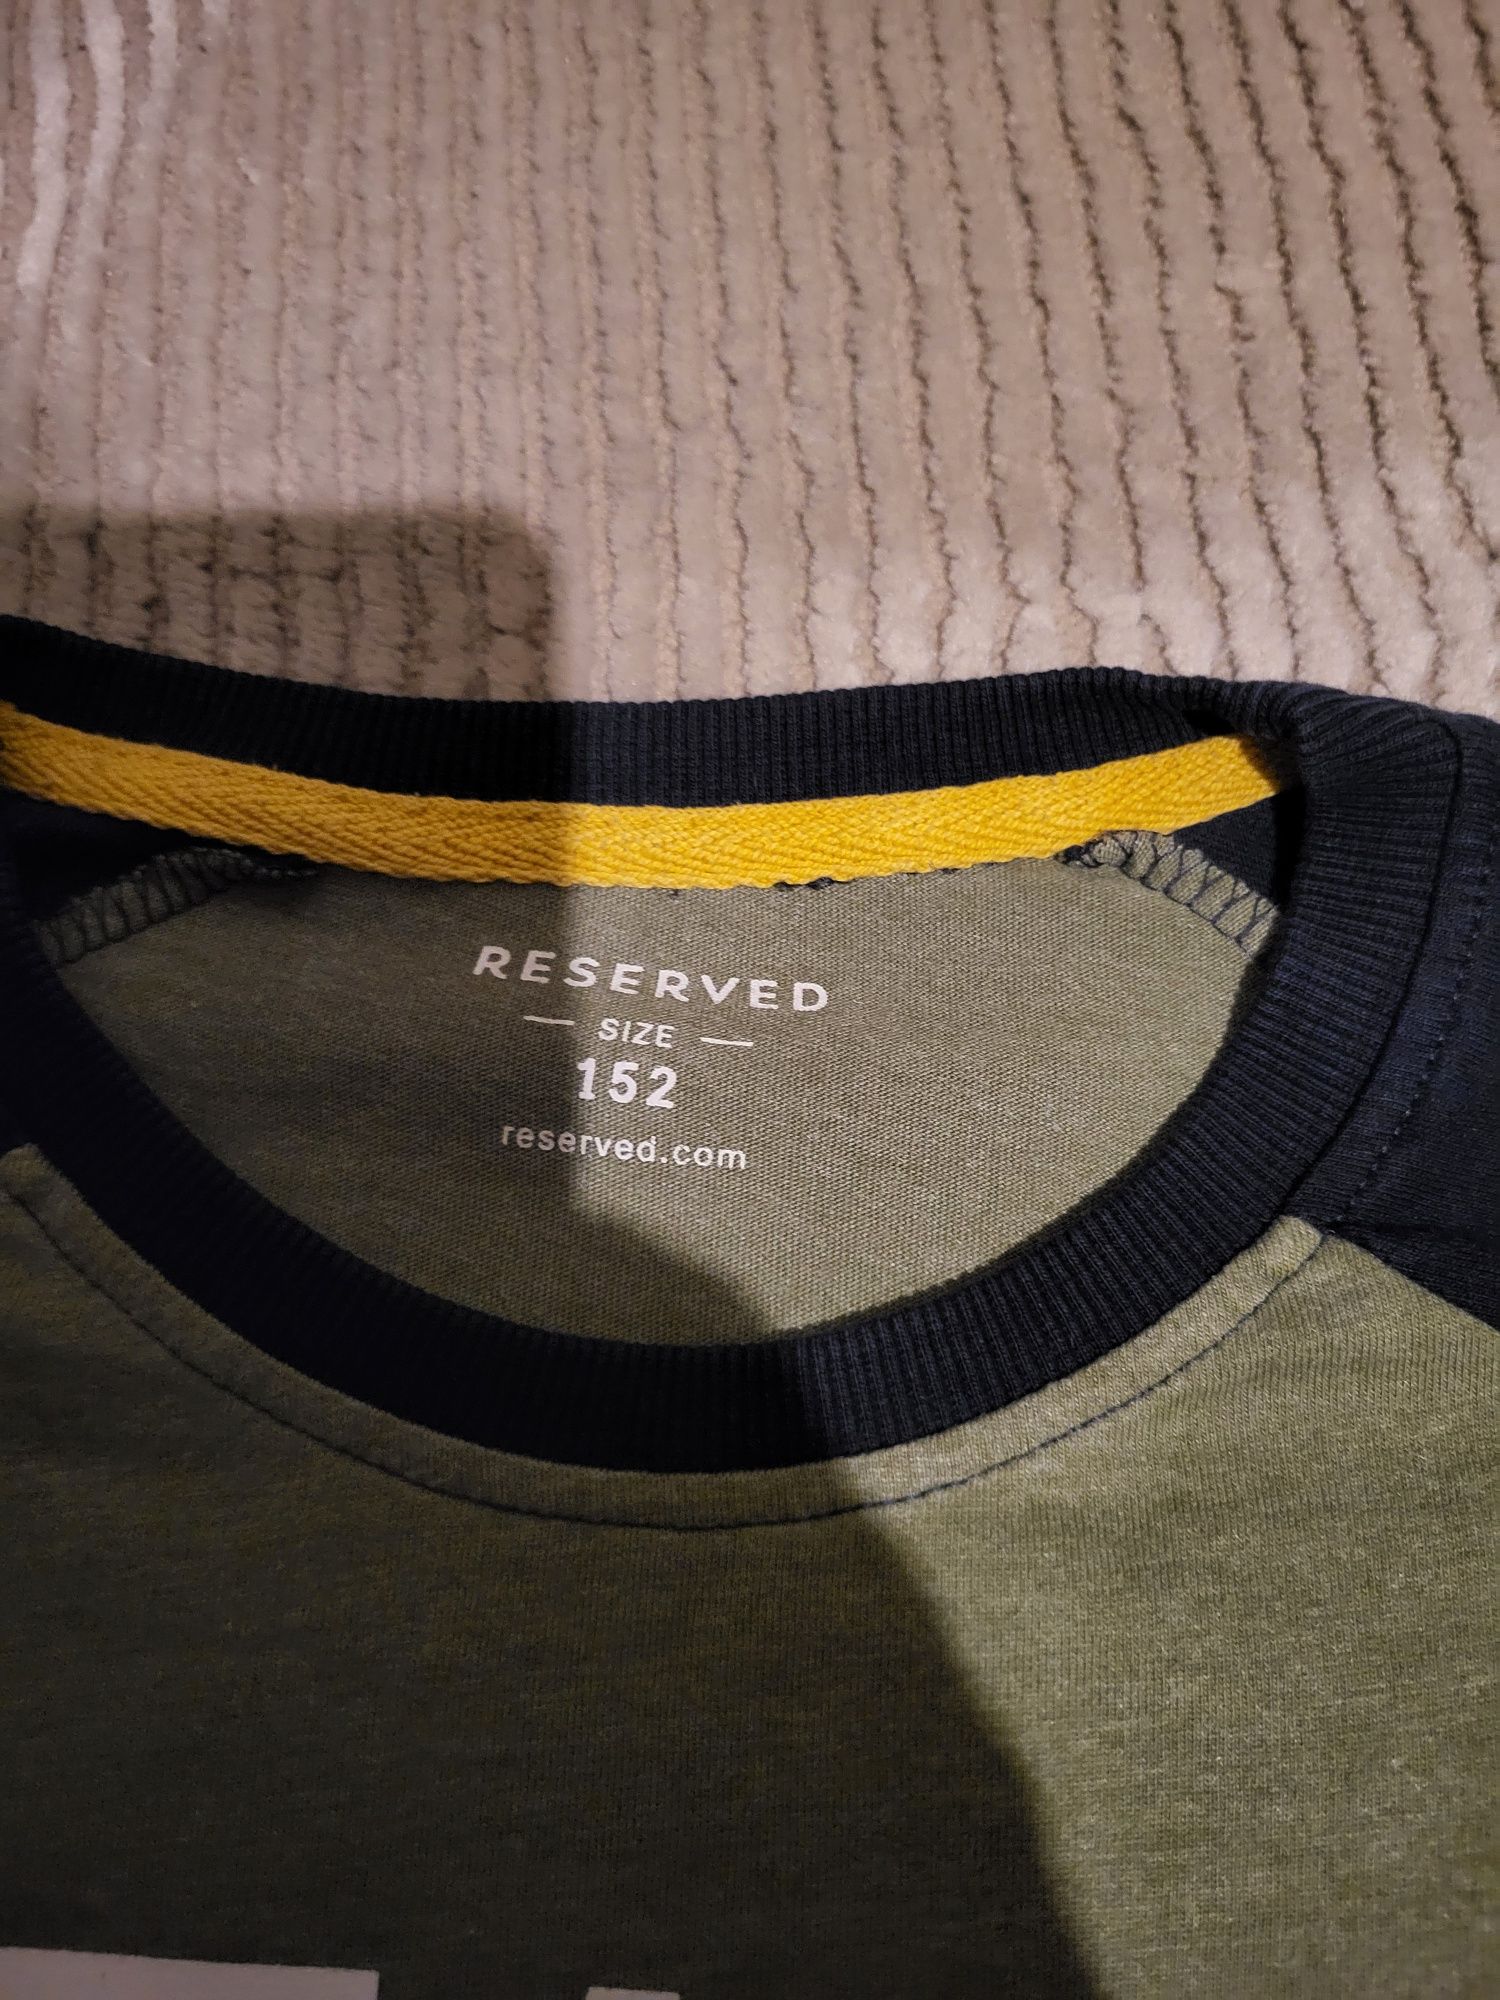 Reserved,H&M,CoolClub 152cm